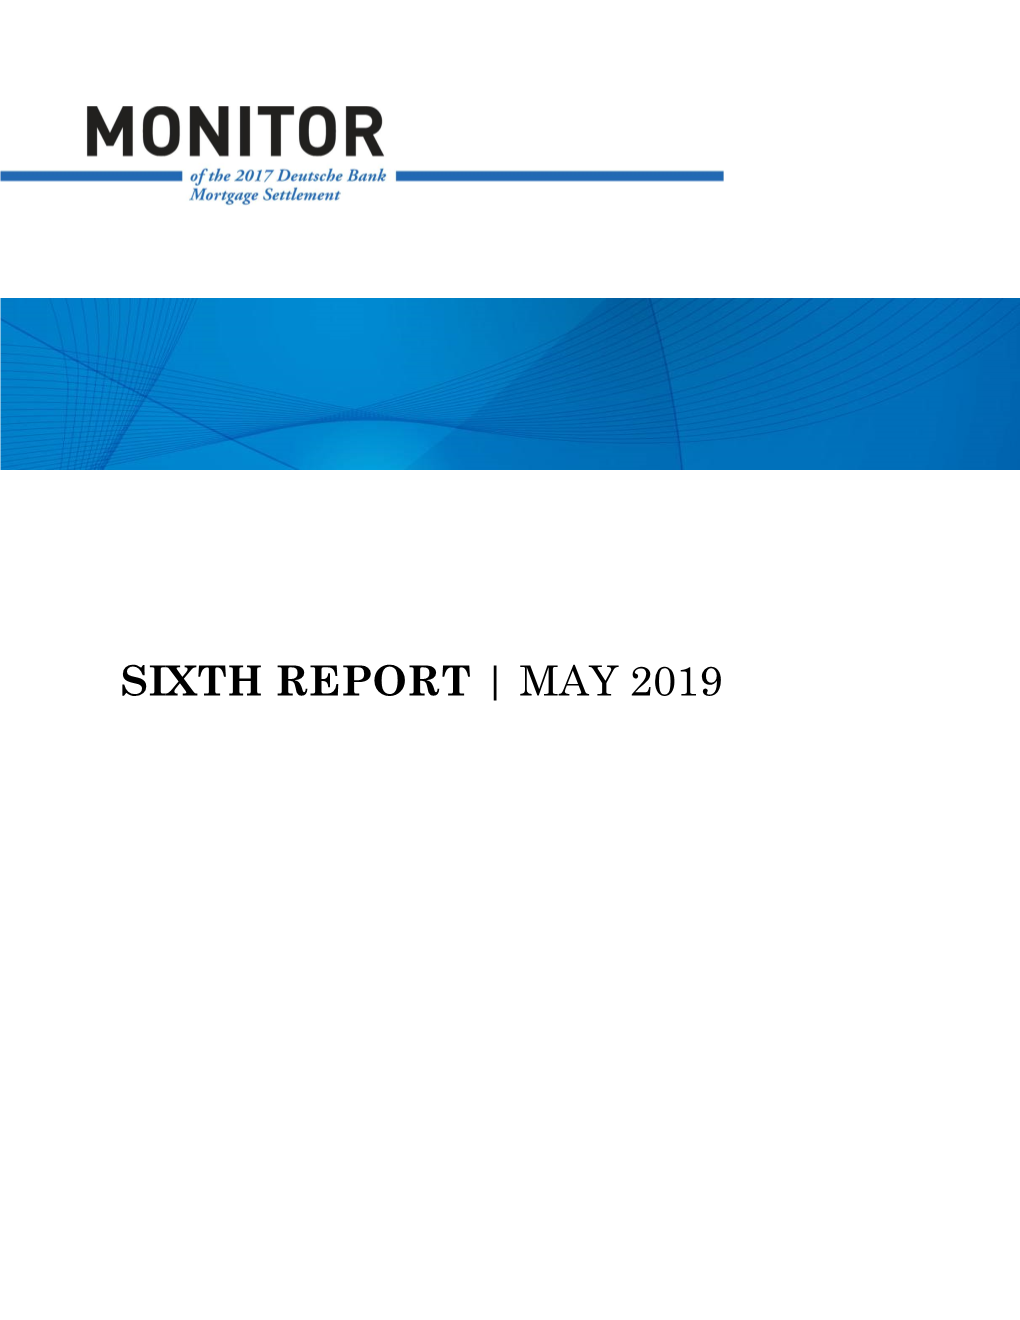 Sixth Report | May 2019 Table of Contents